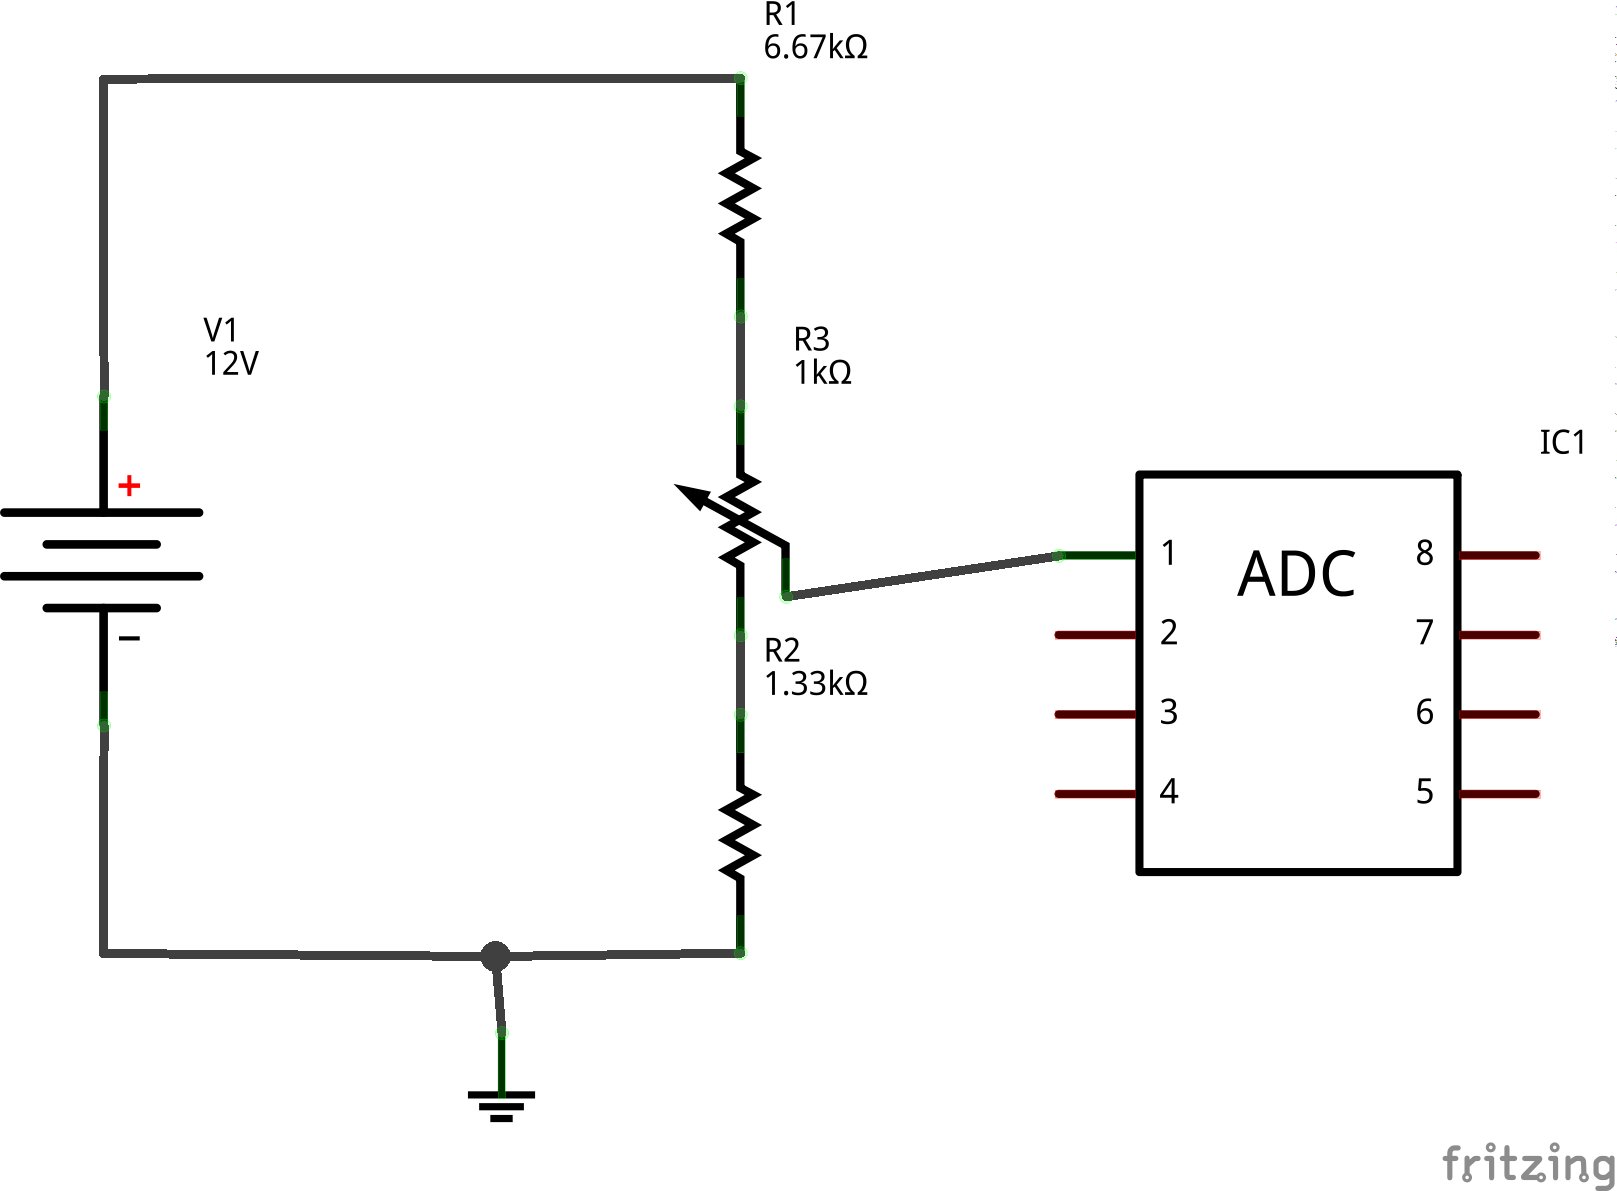 Simple voltage divider connected to ADC